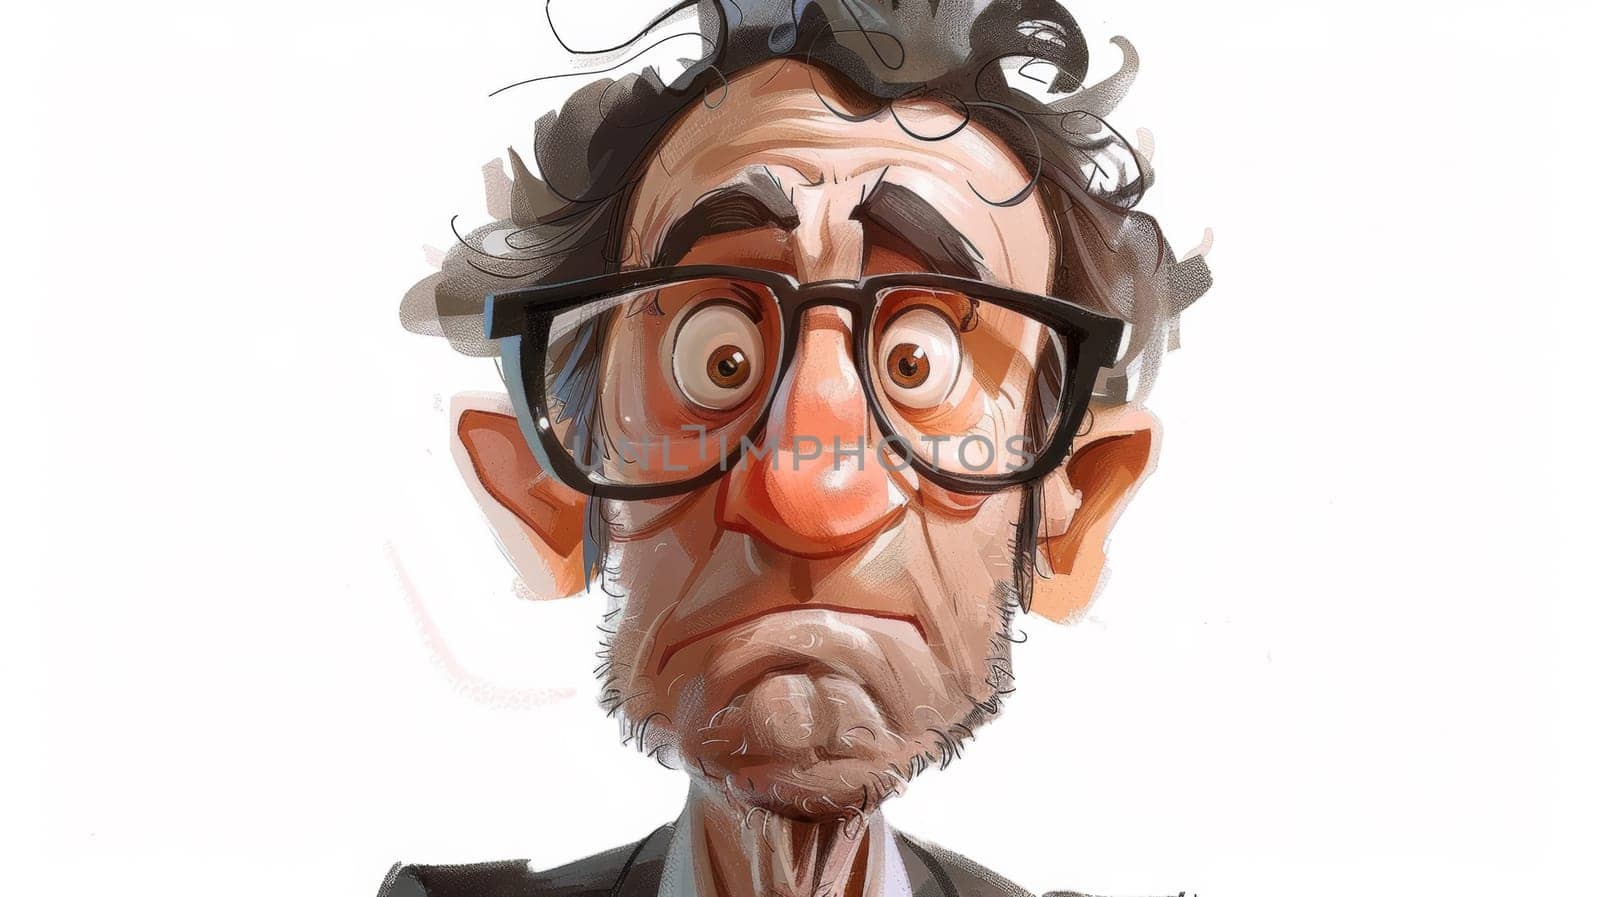 A cartoon of a man with glasses and curly hair